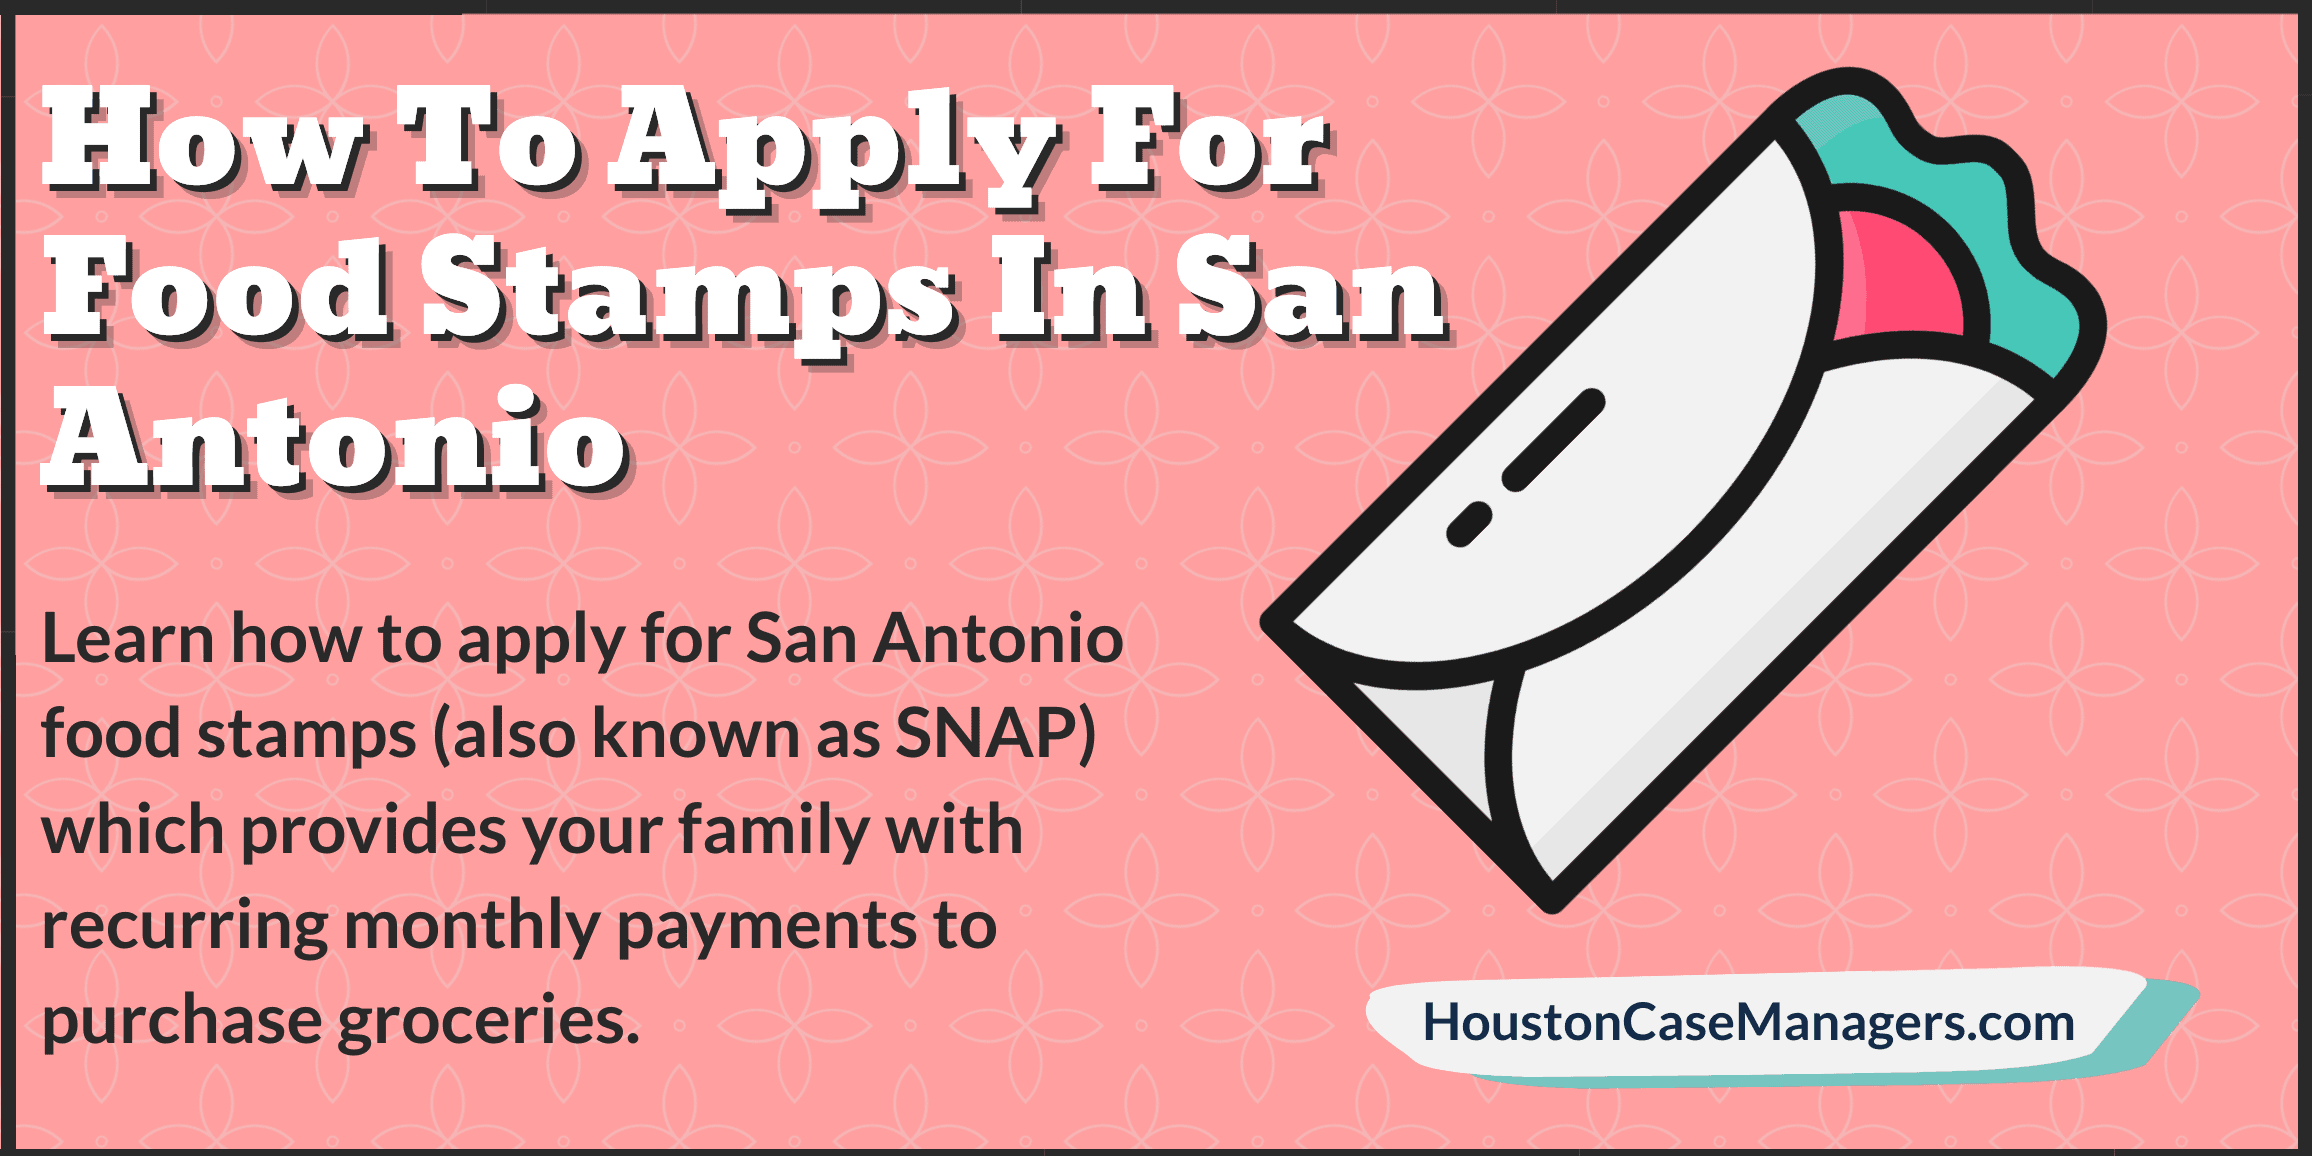 how to apply for food stamps in san antonio